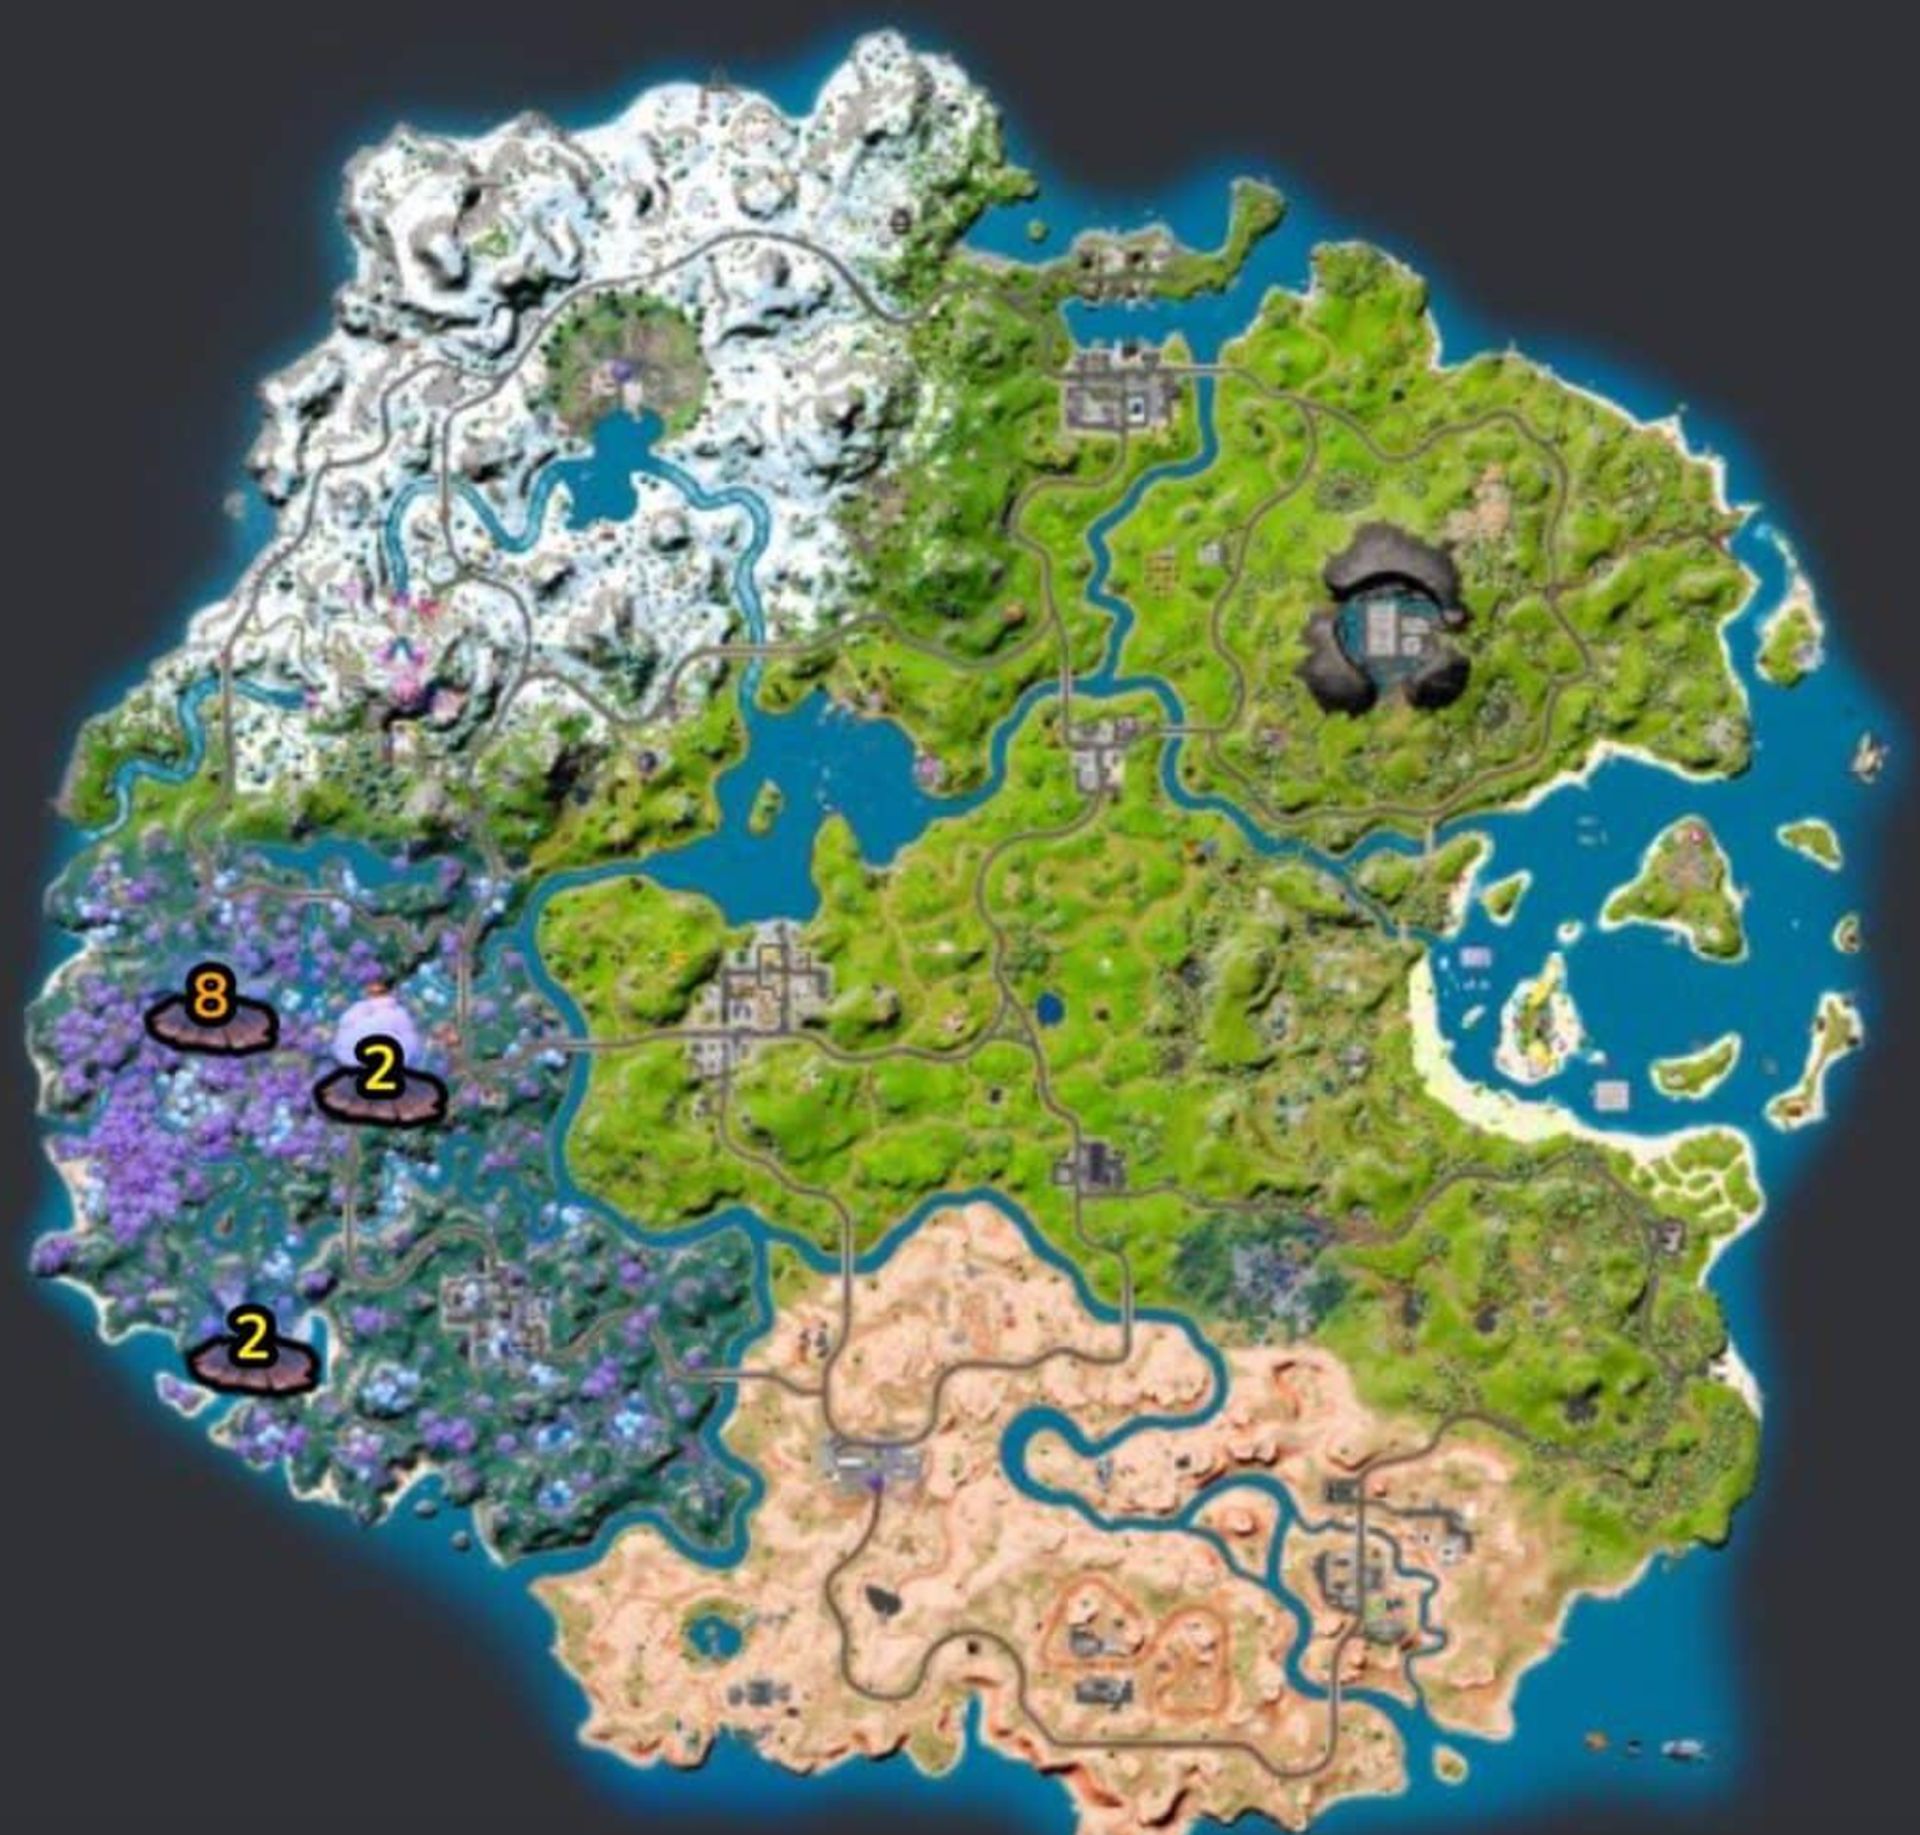 Today we are here to explain what is a geyser in Fortnite. Find out Fortnite geyser locations below, if you don't know how to launch into the air using a geyser, we are here to help.